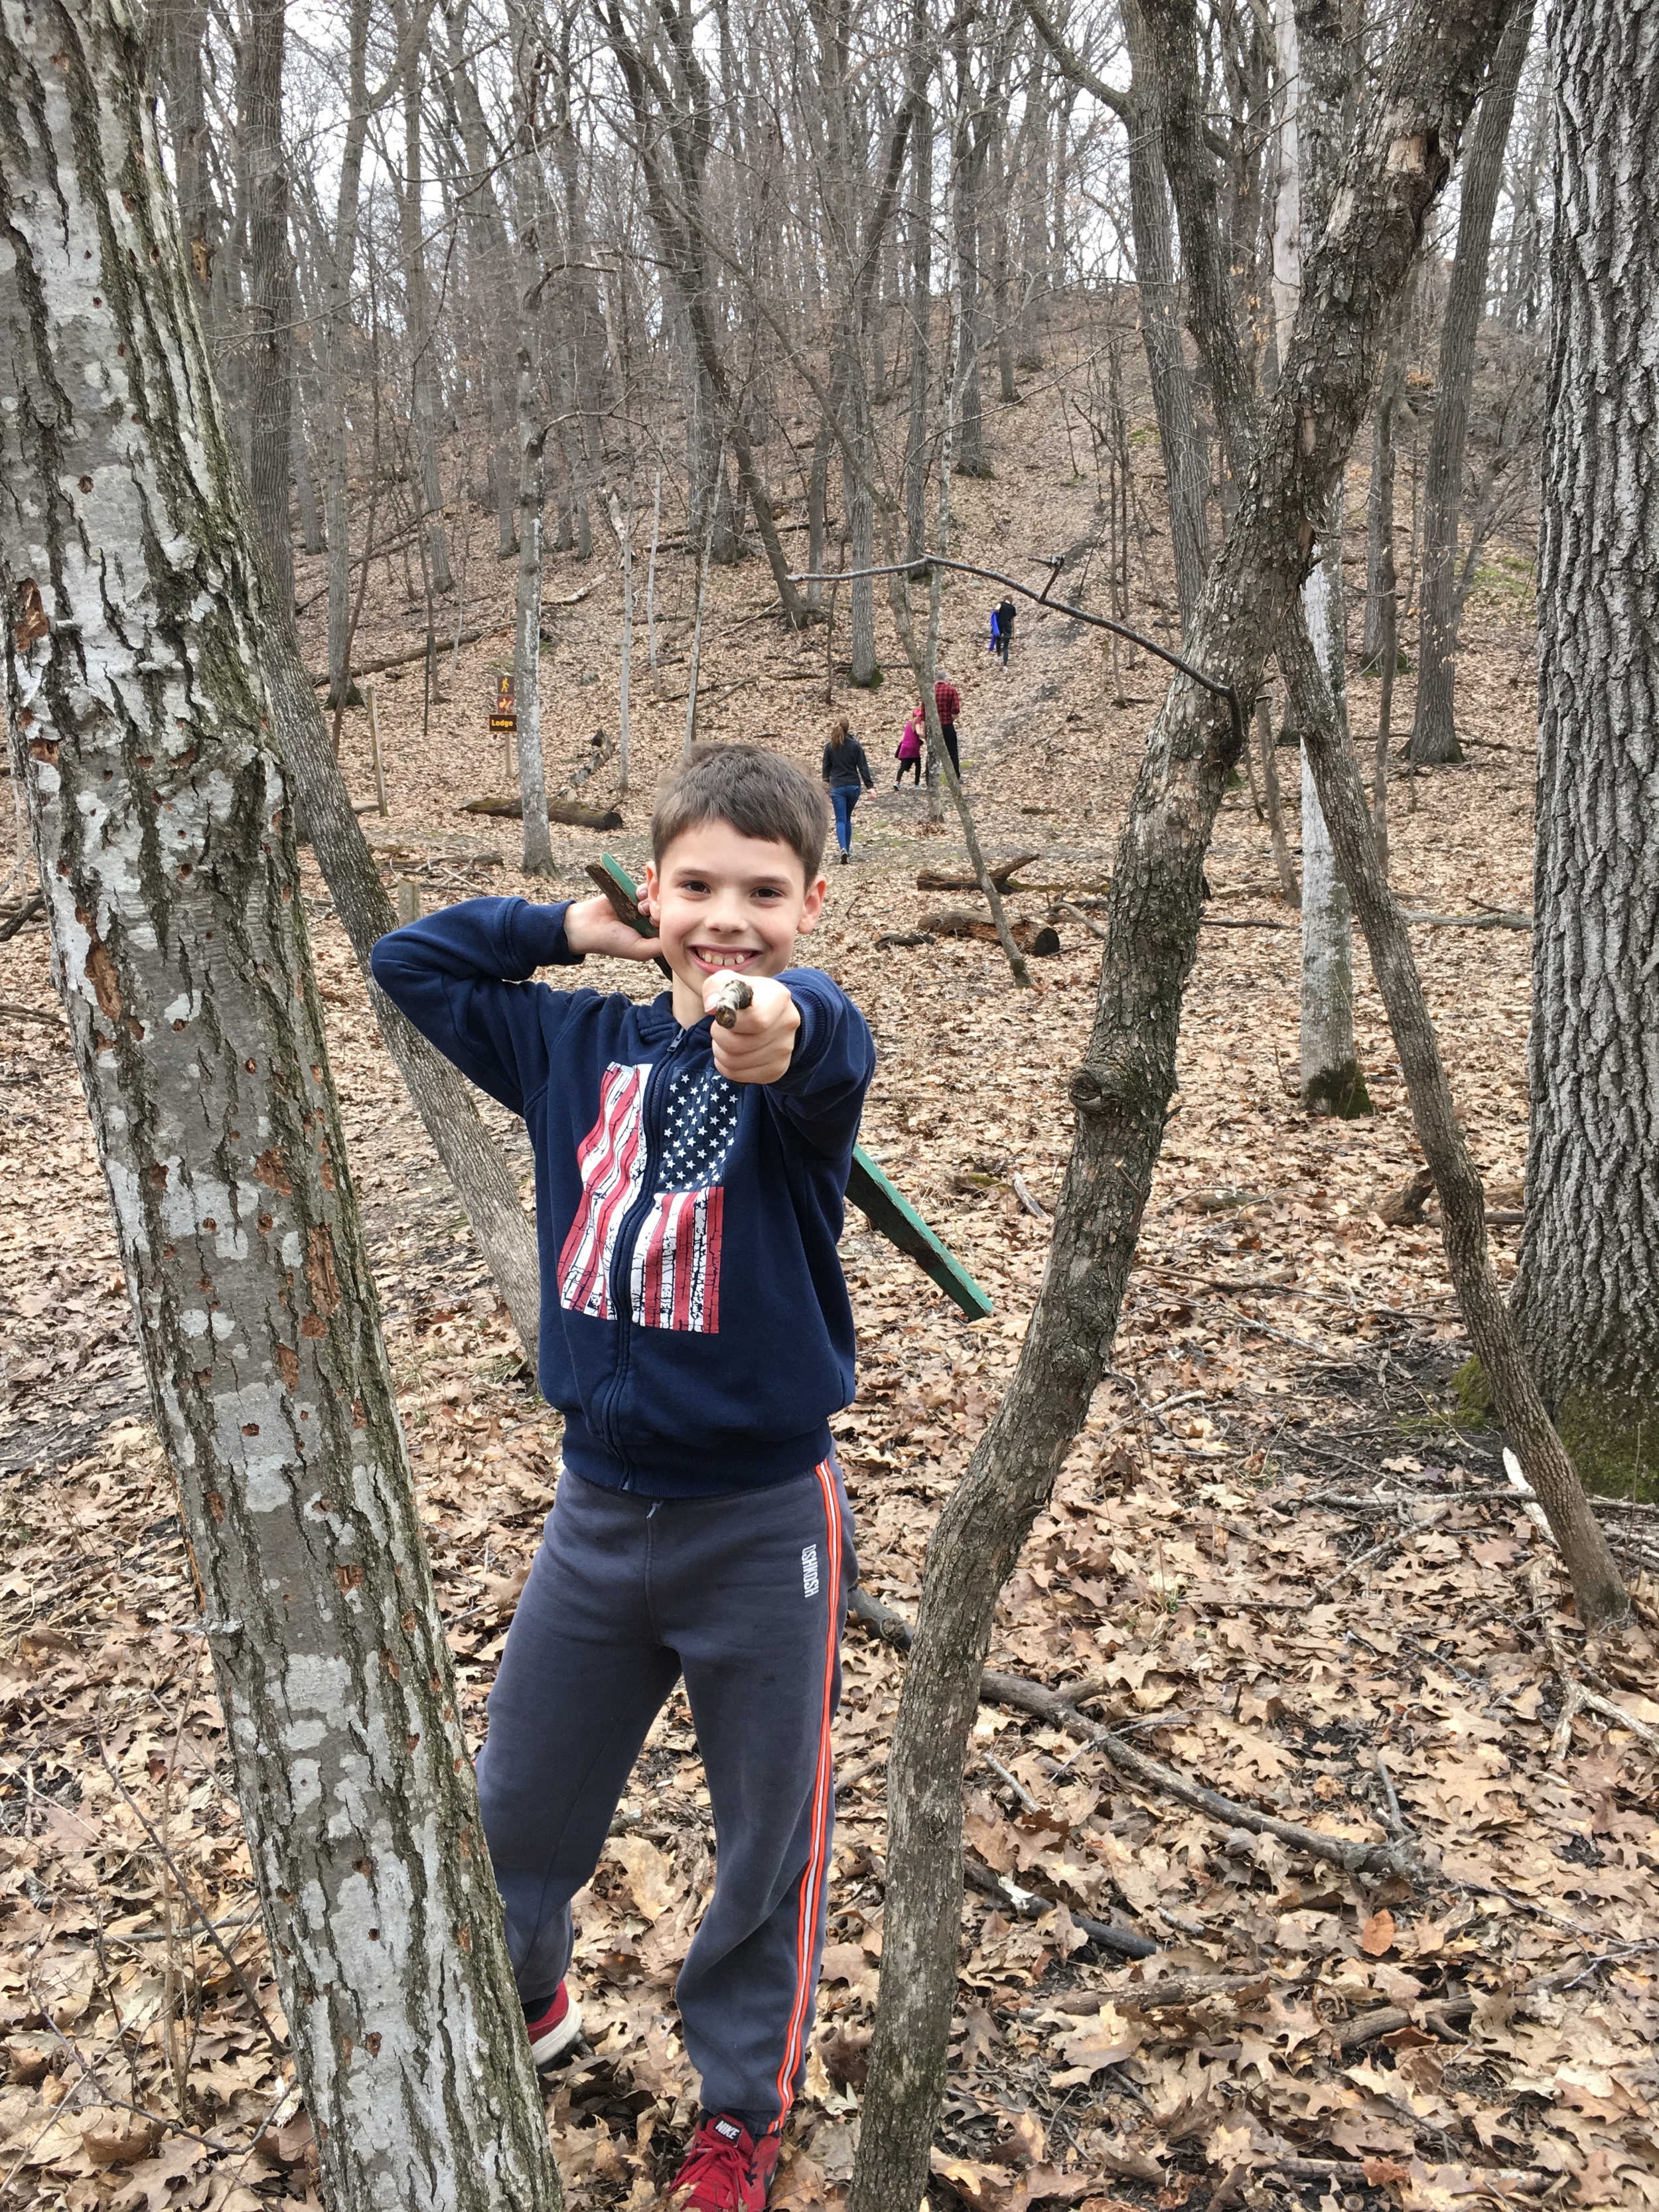 The remedy for screen obsessed kids? Getting out in nature!